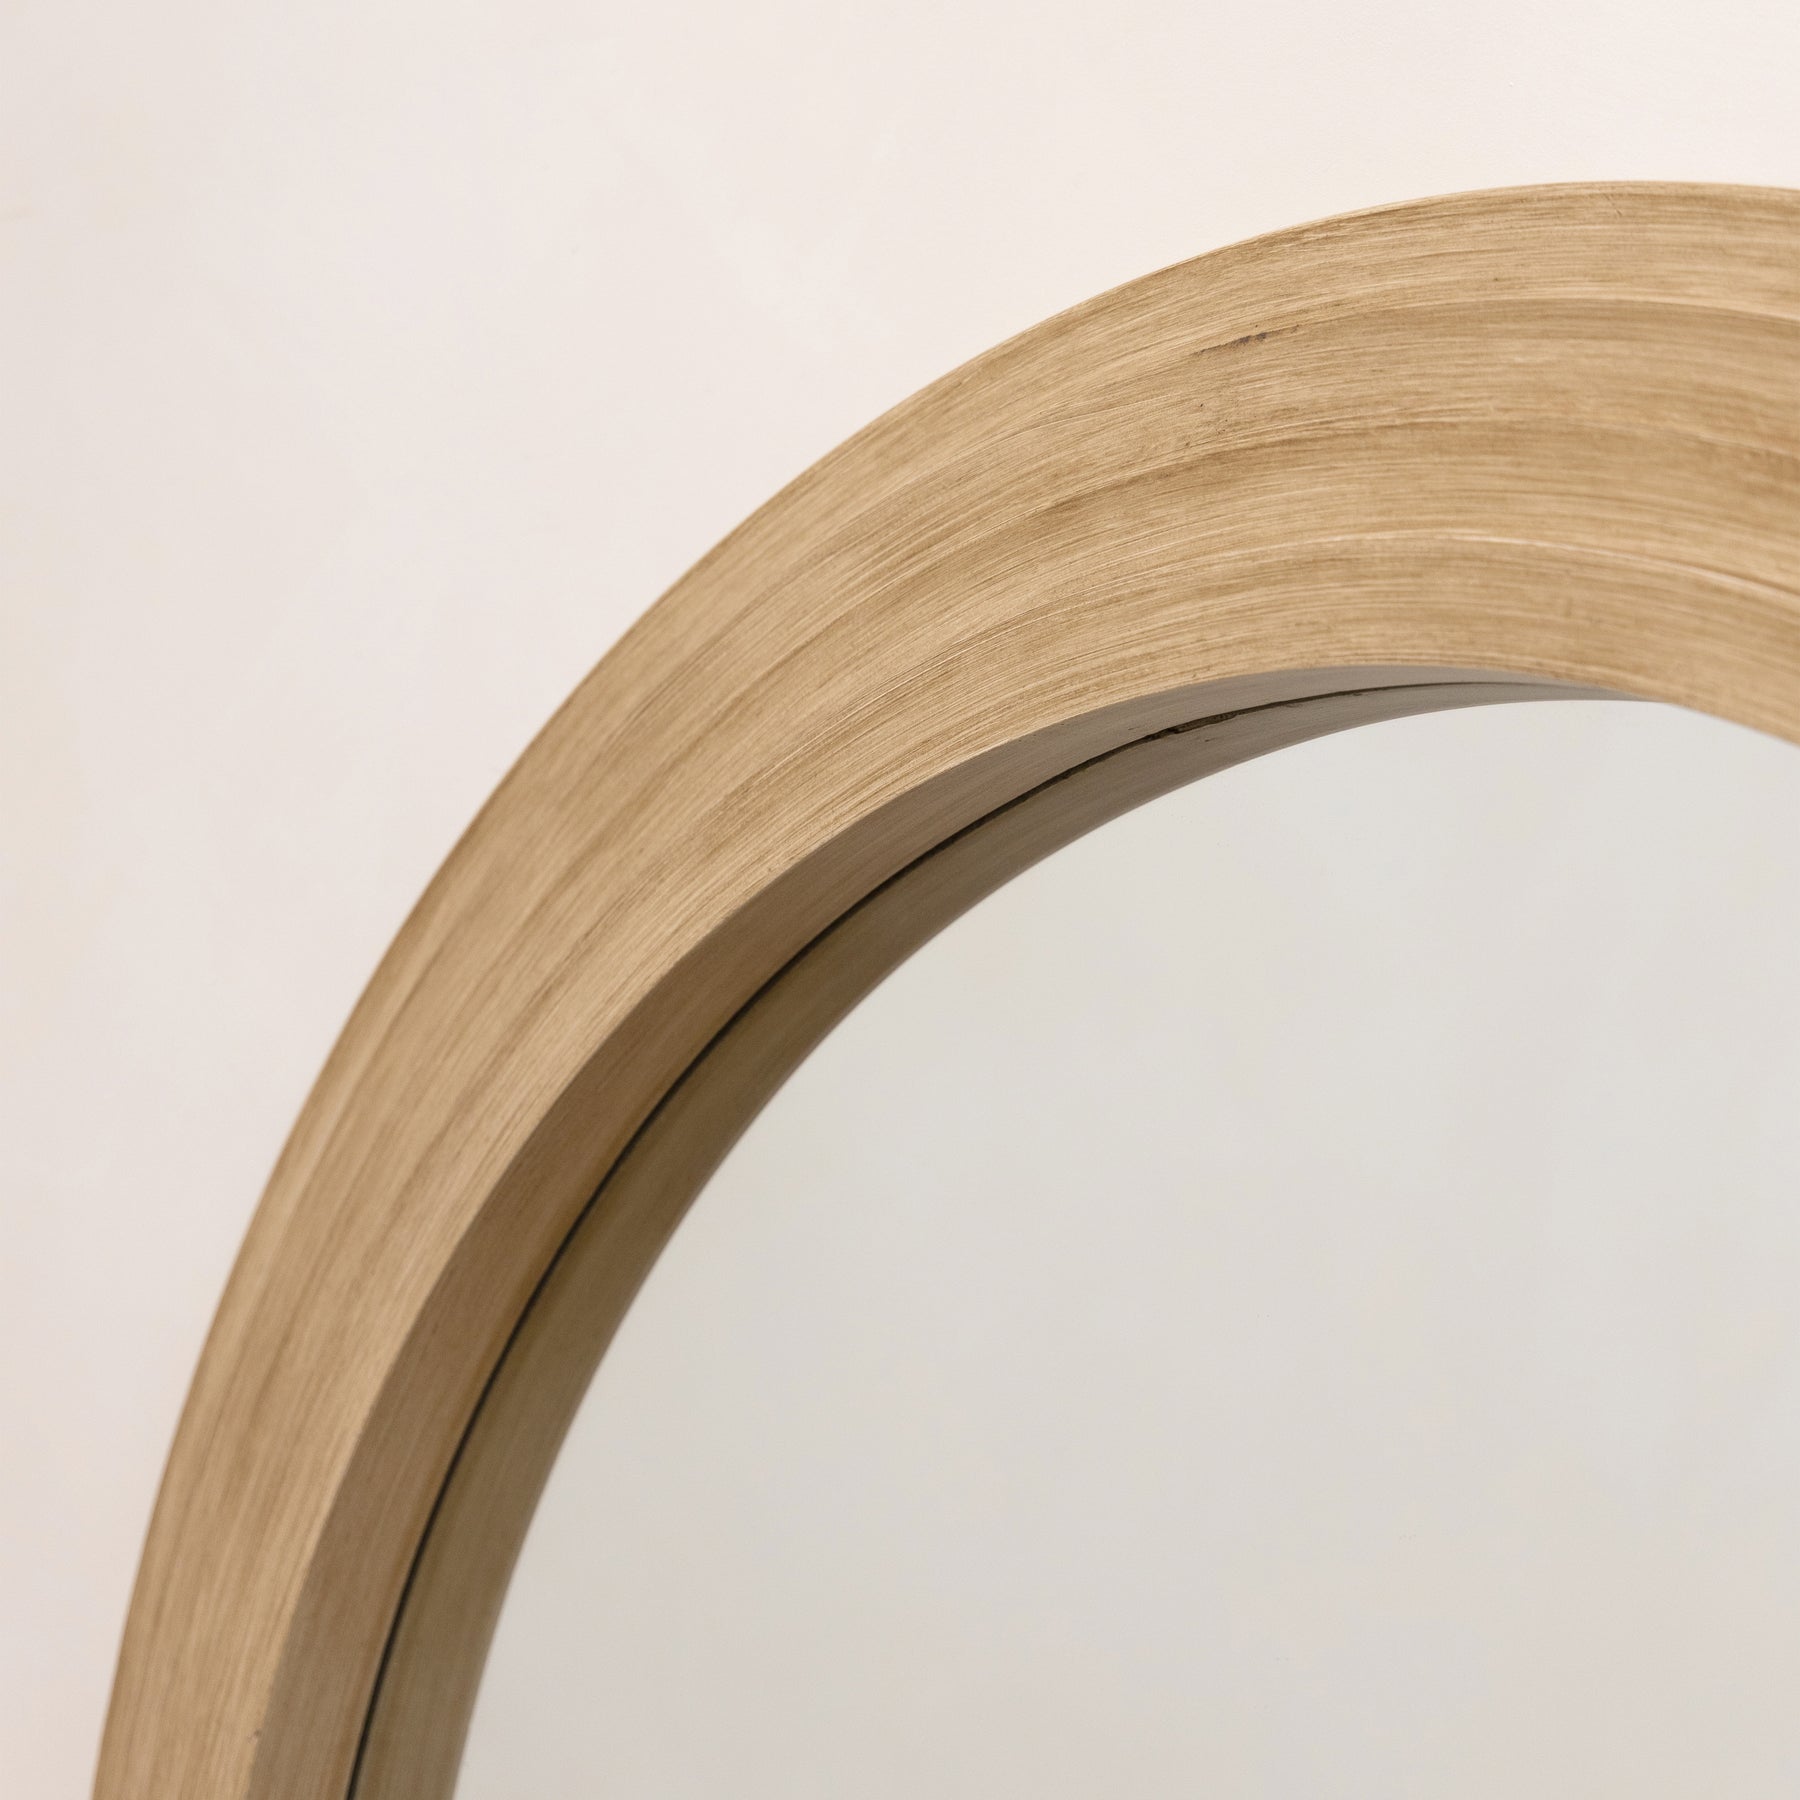 Luciana - Full Length Arched Washed Wood Mirror 180cm x 110cm